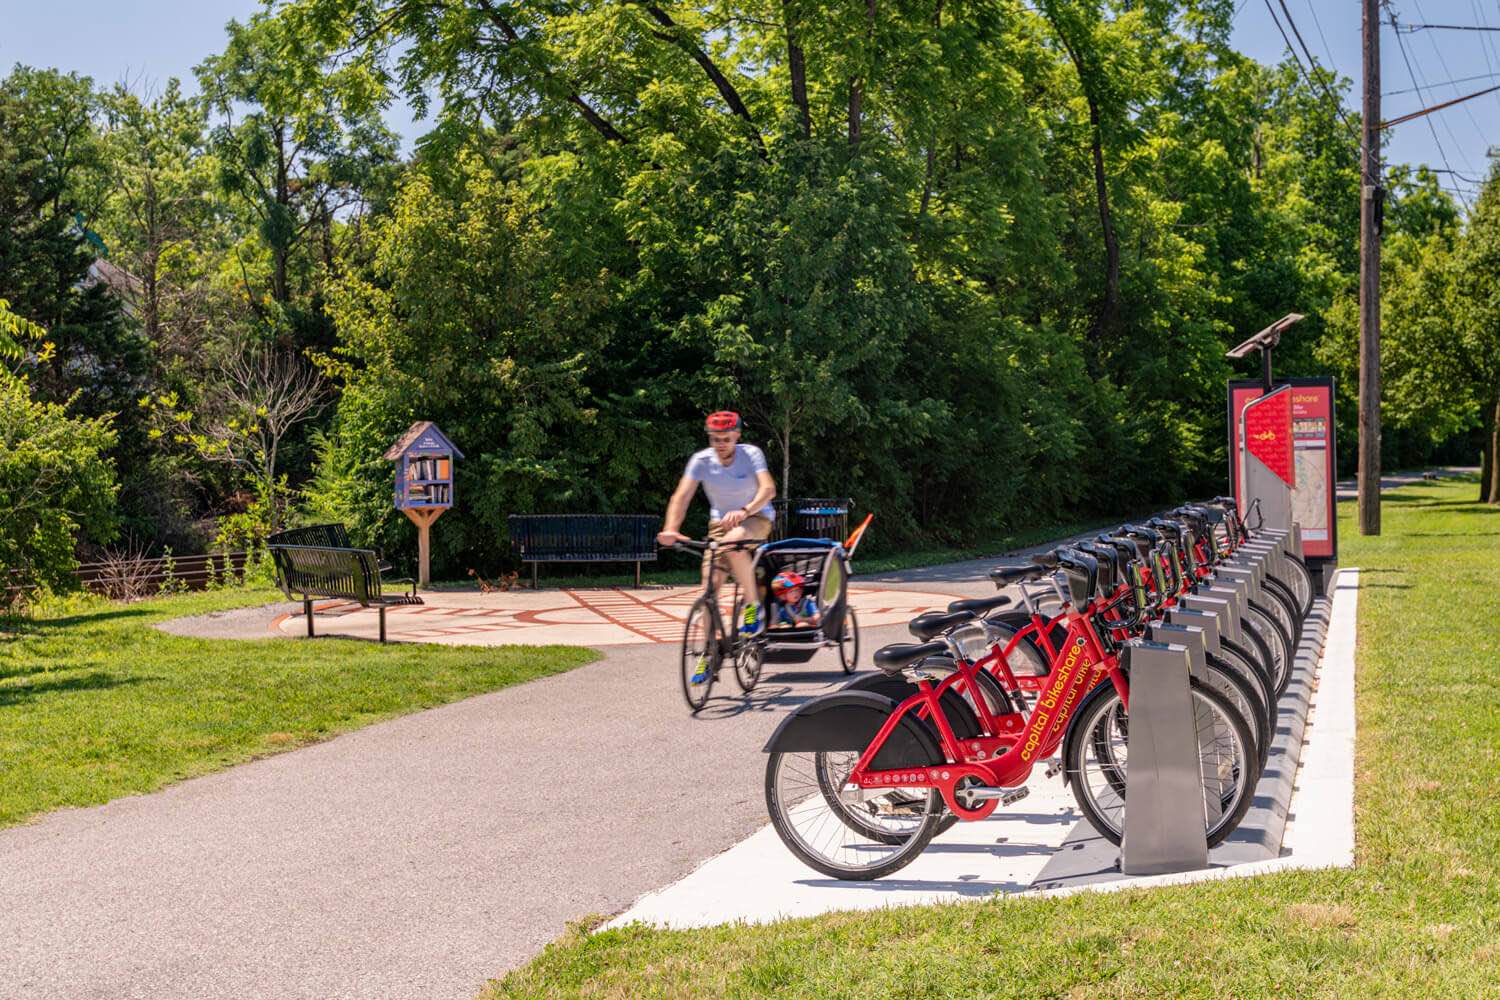 Rent a bike from Capital Bikeshare and go explore